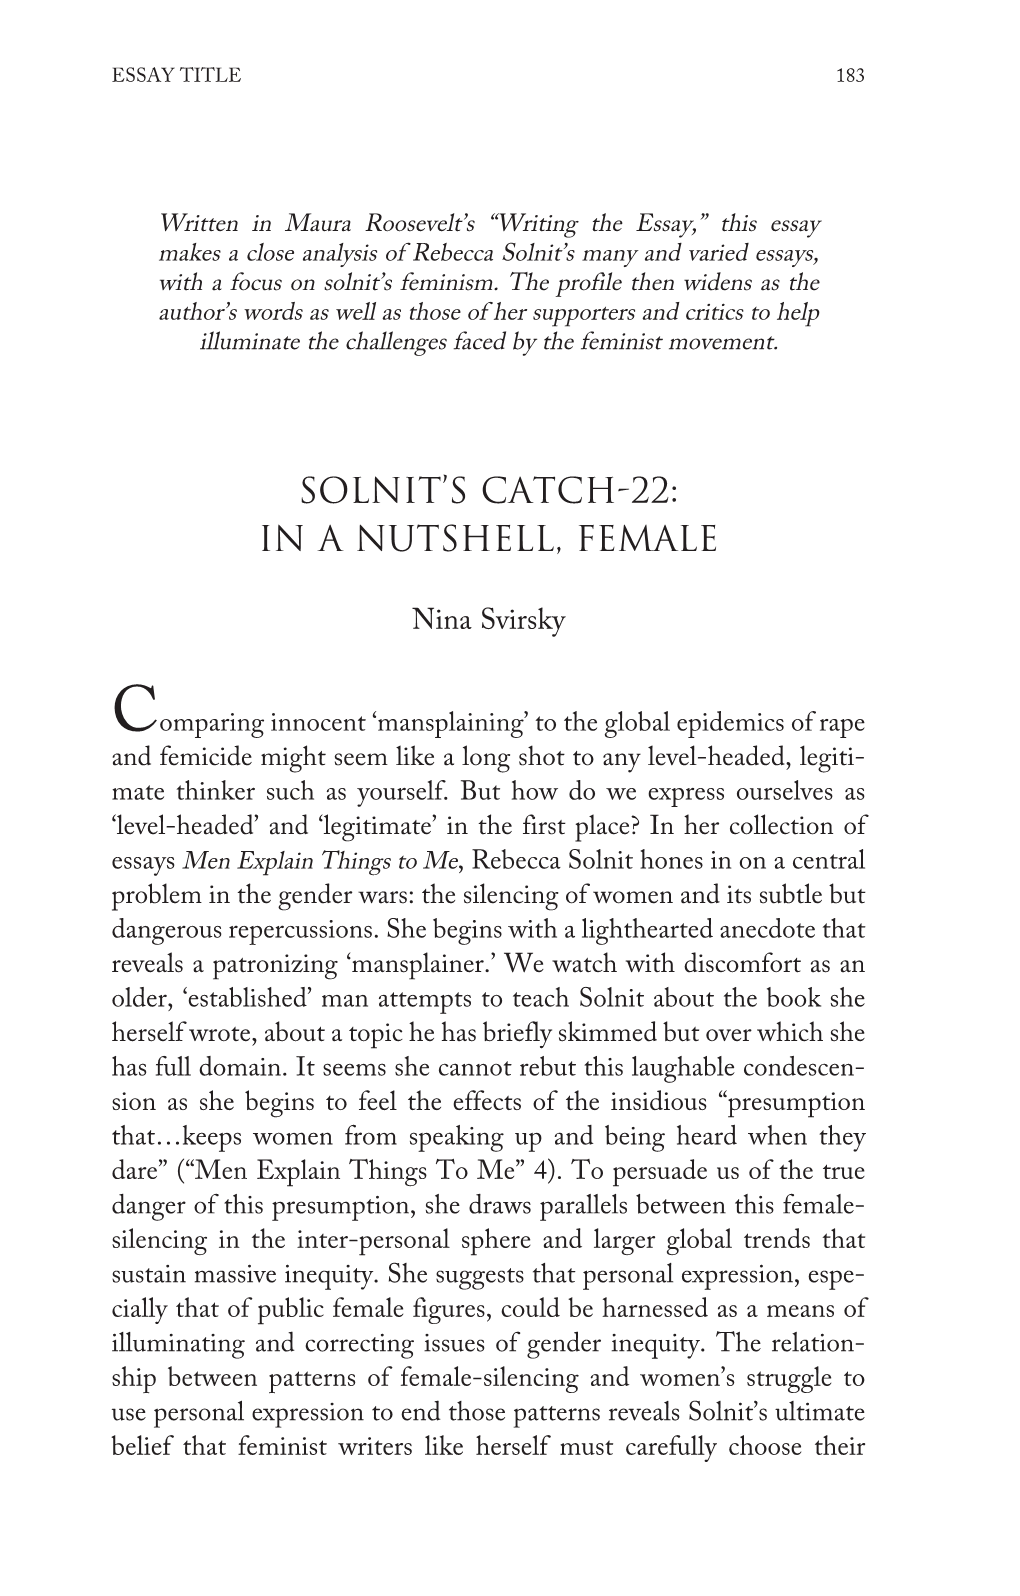 Solnit's Catch-22: in a Nutshell, Female